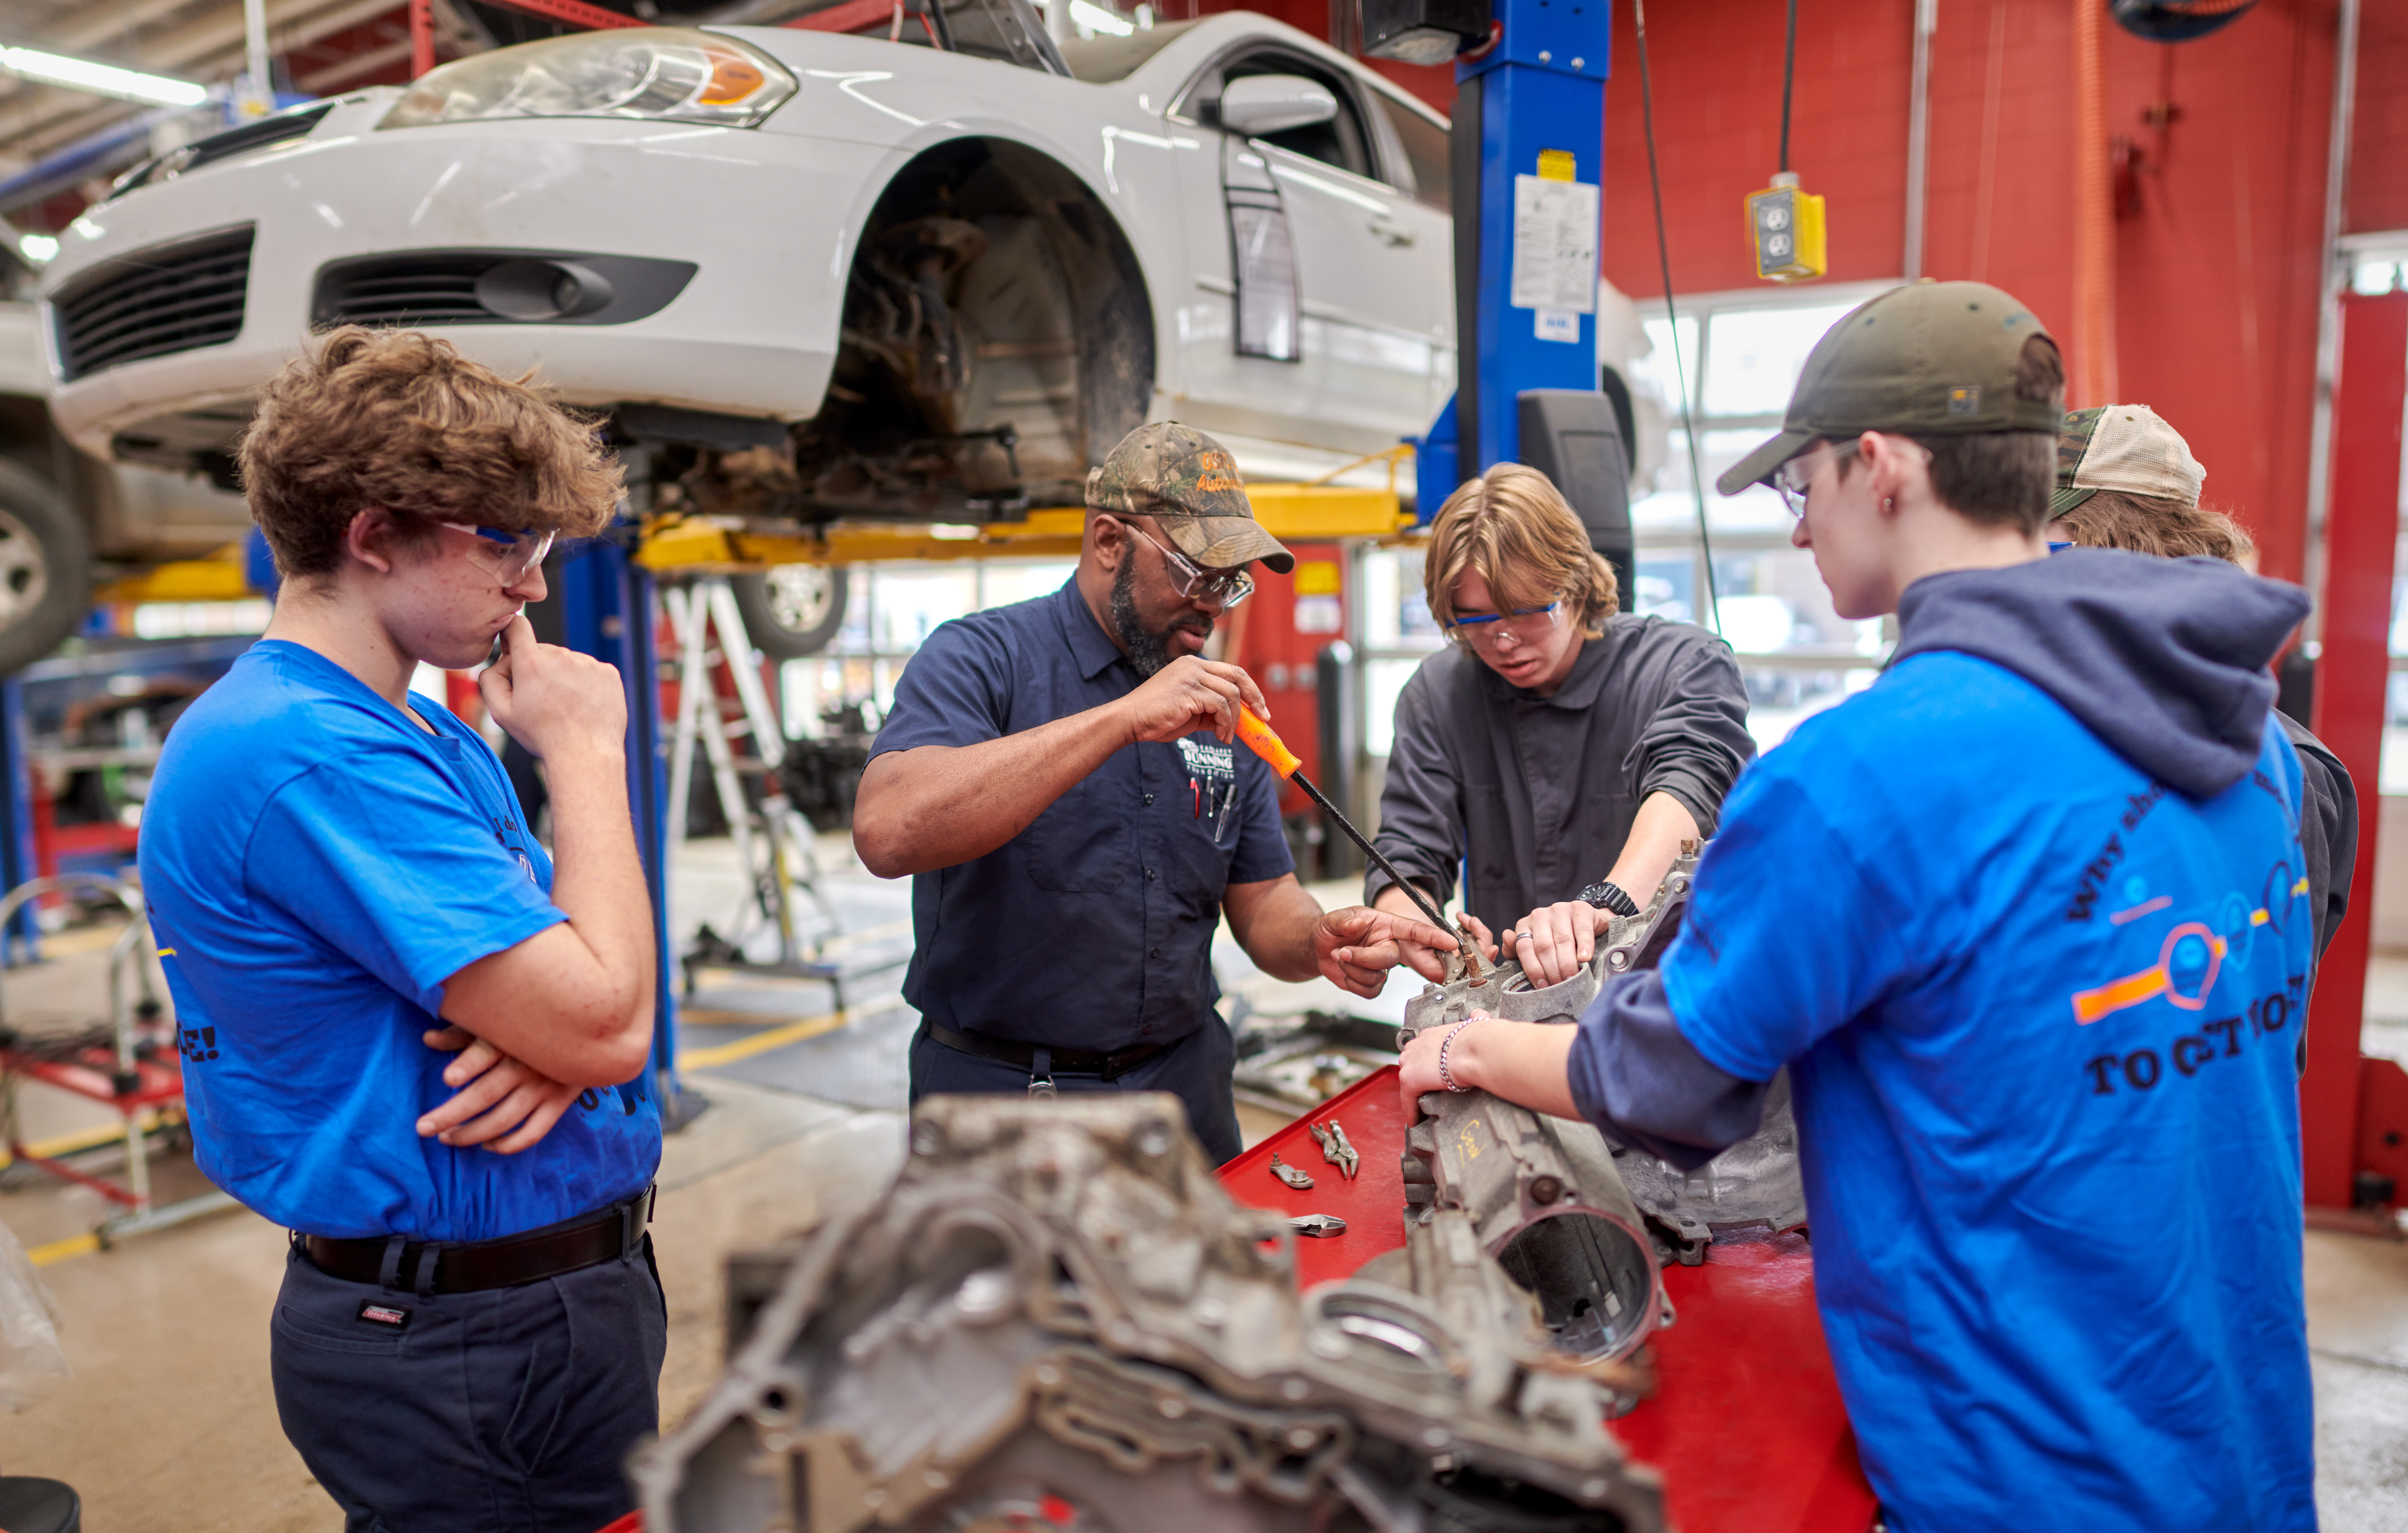 A picture of Juwan Willis teaching students in an auto shop.